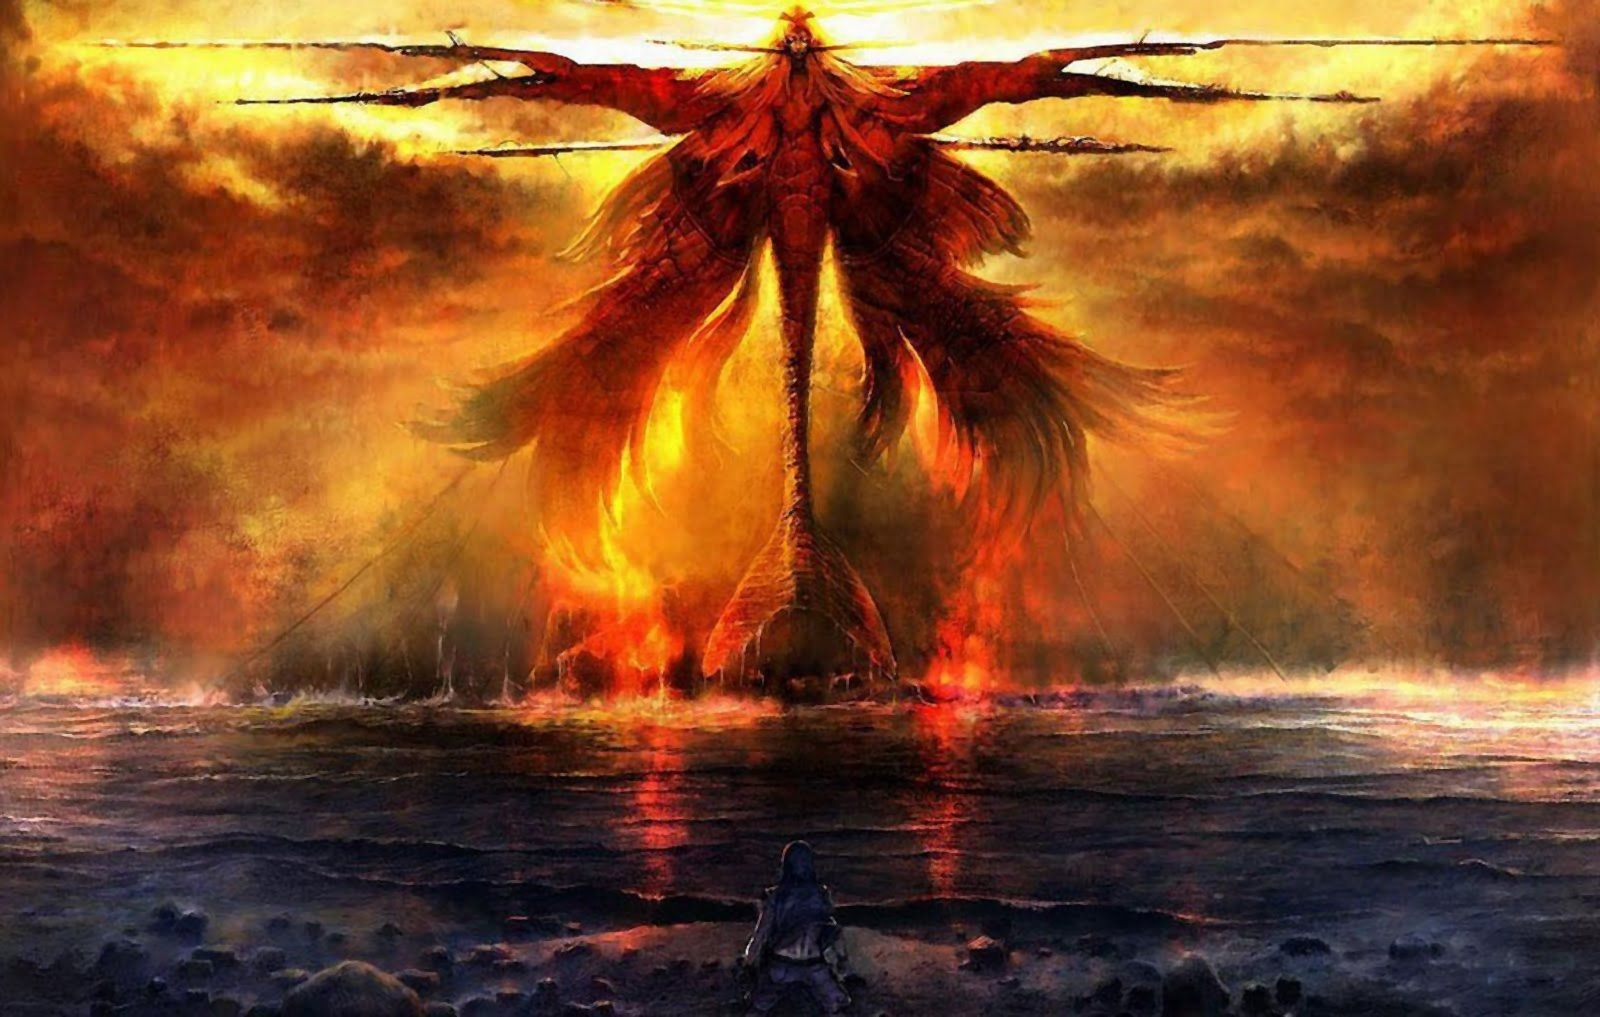 dragons and phoenix rising from ashes wallpapers - wallpaper cave